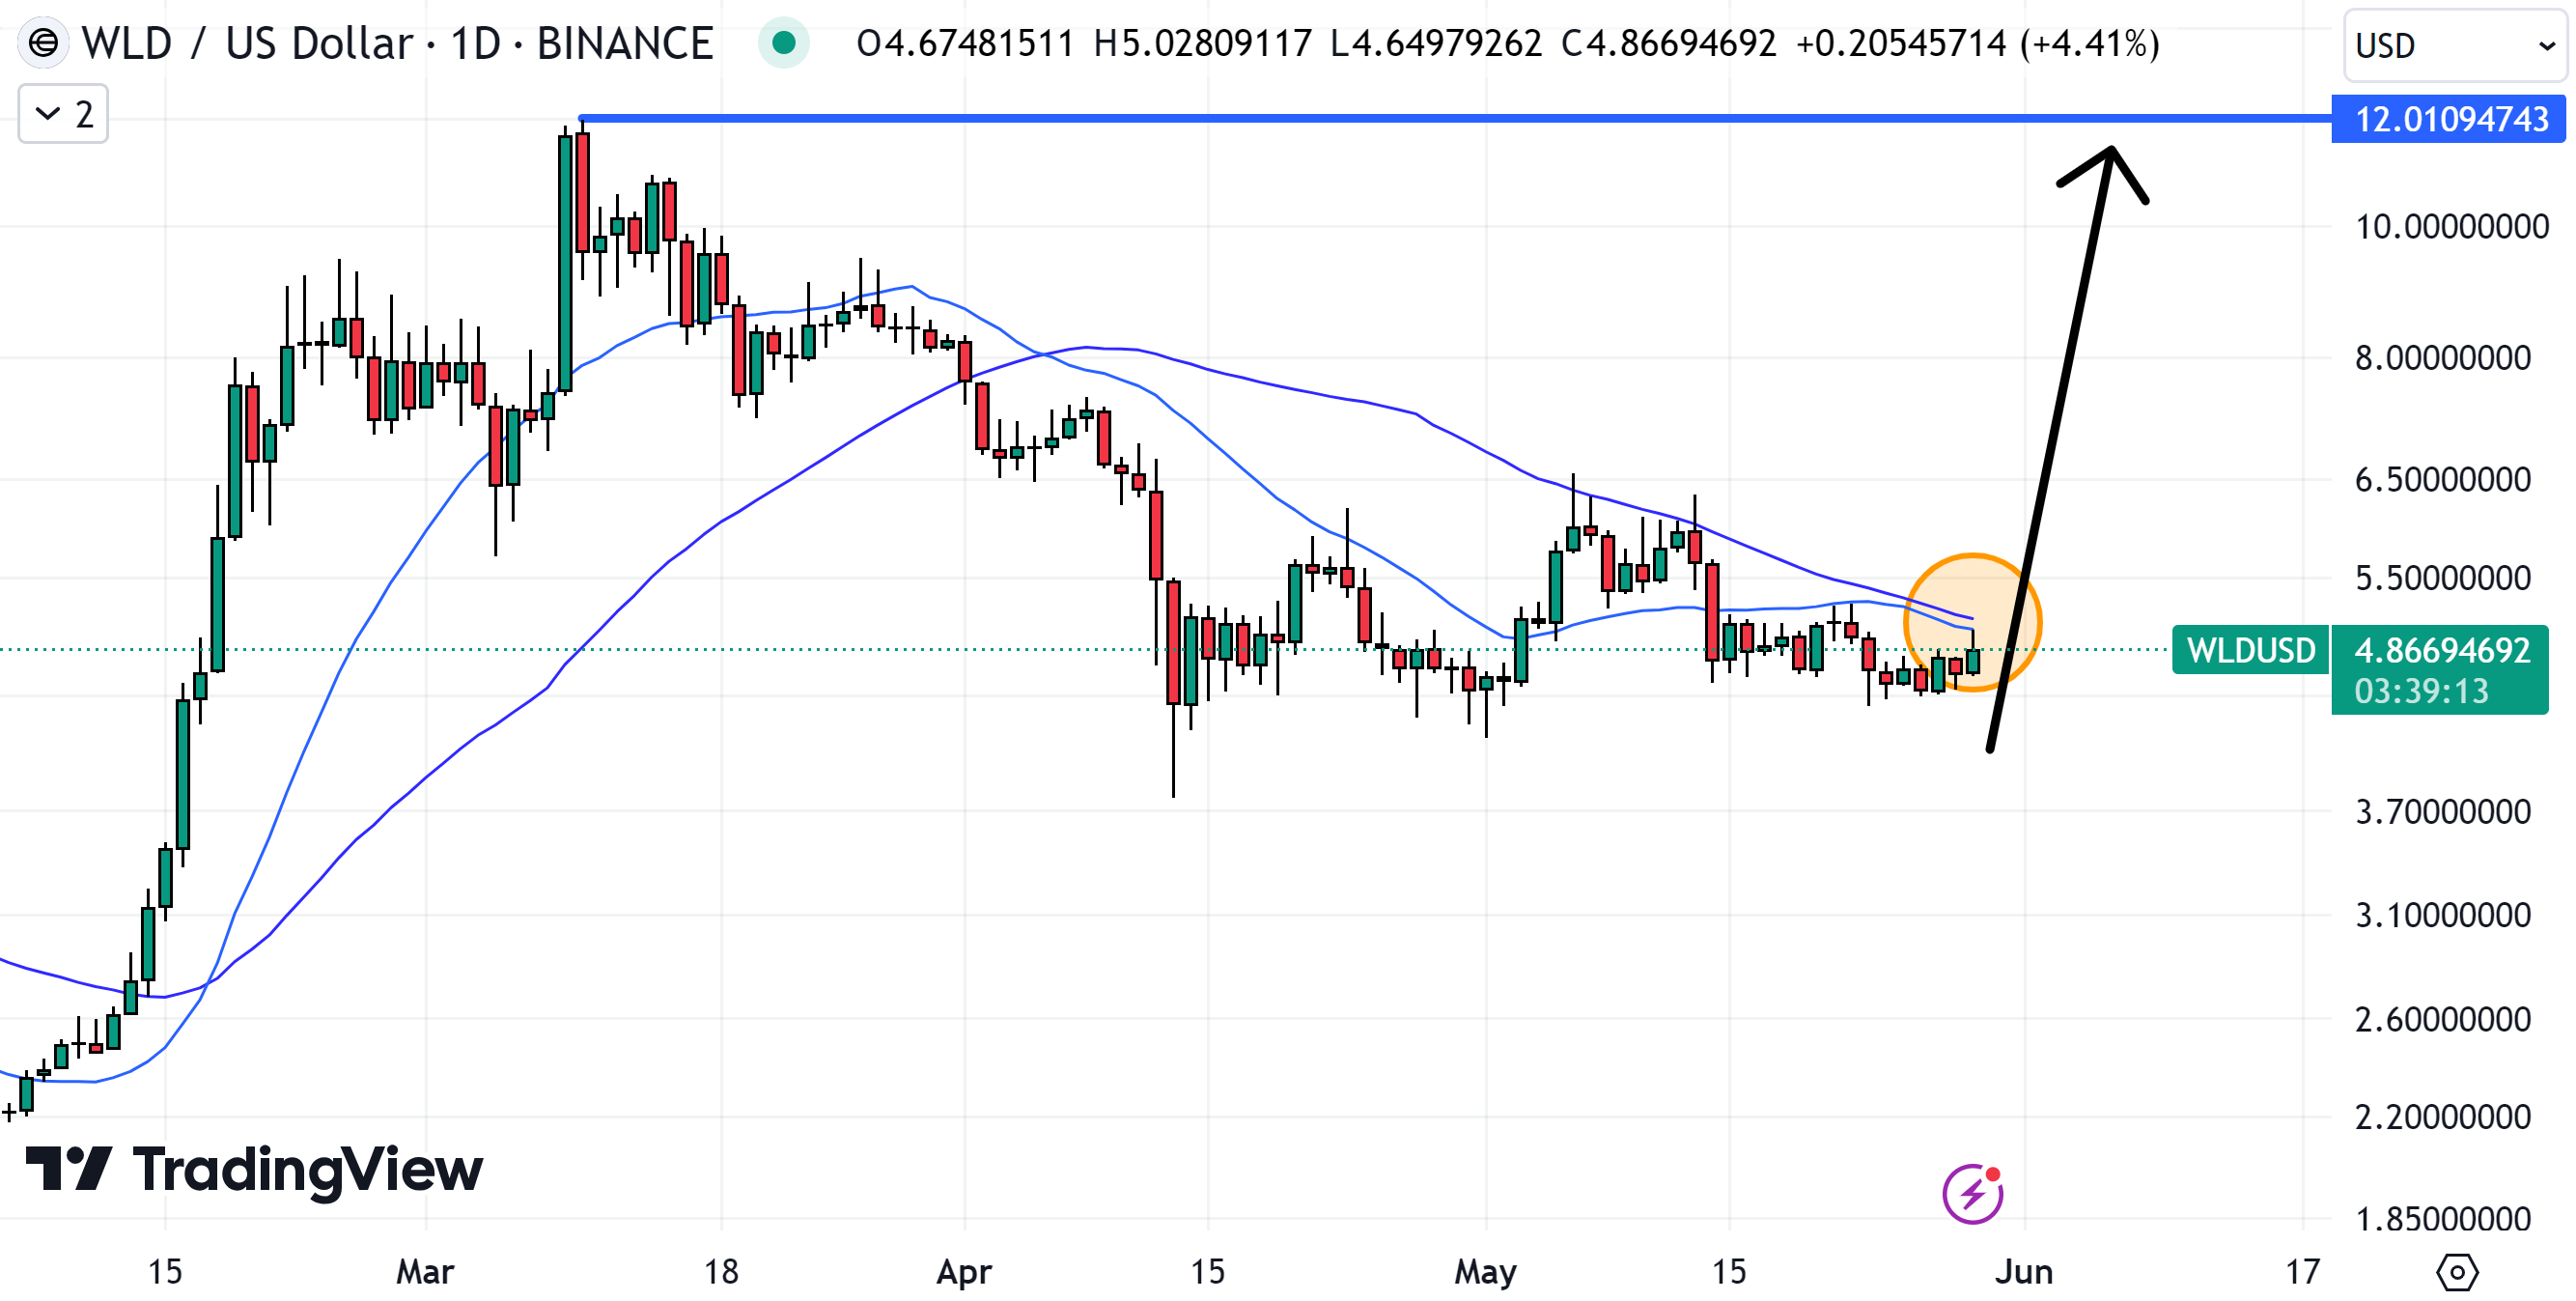 If WLD can break above its 21 and 50DMAs, it could be the best crypto to buy now. 